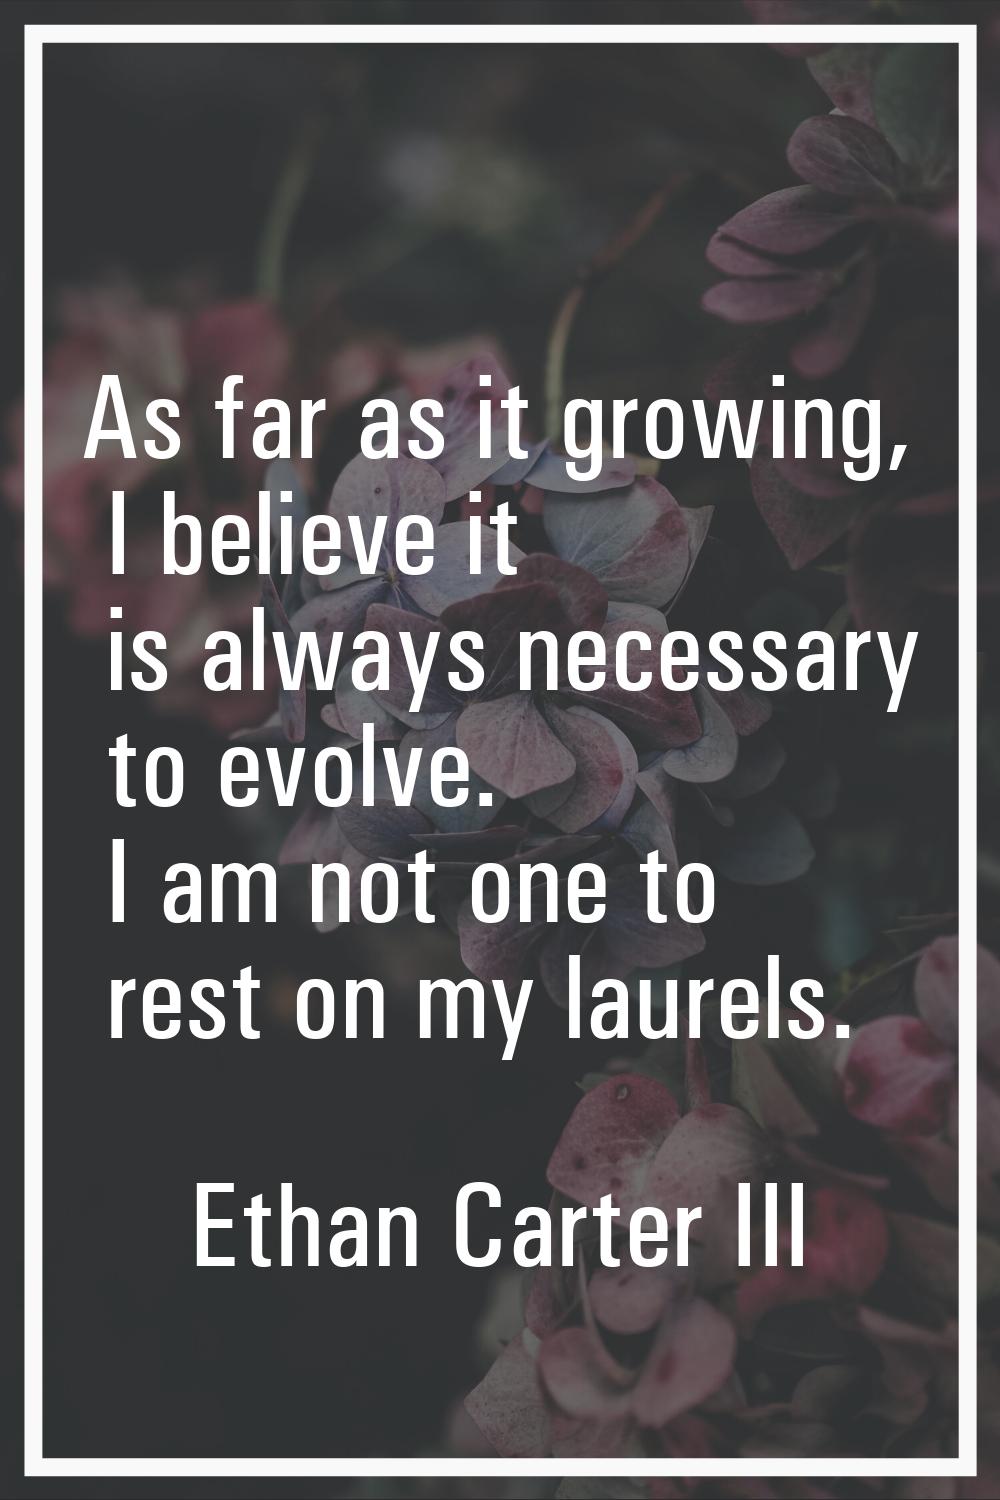 As far as it growing, I believe it is always necessary to evolve. I am not one to rest on my laurel